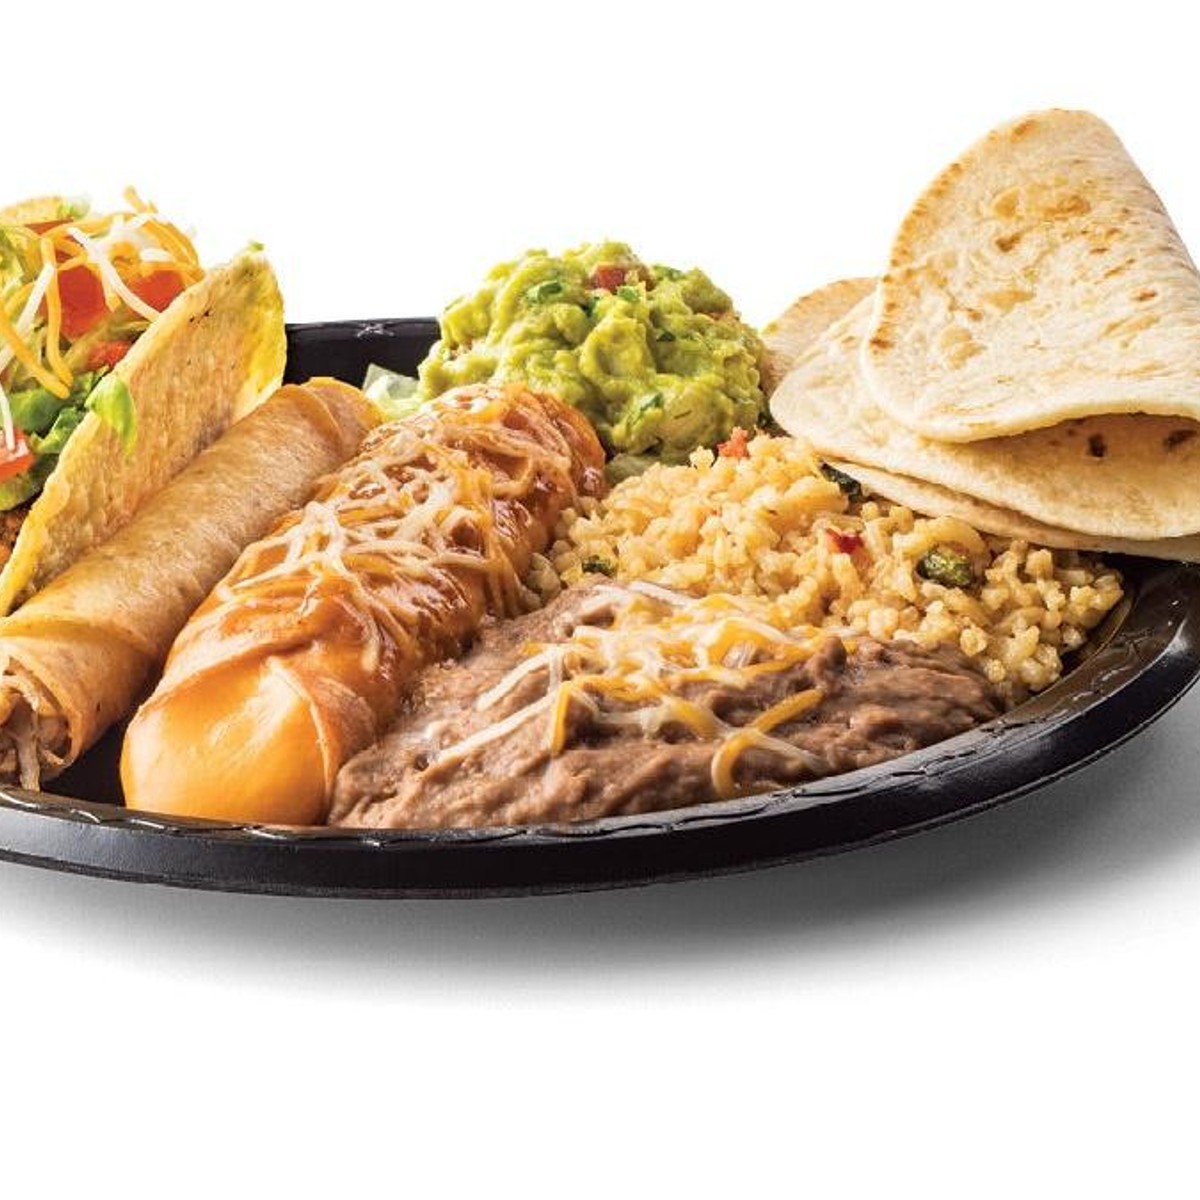 Introducing the new 5 Under $5 value menu at Taco Cabana! Try TC classics  and new items including our Double Crunch Pizza and the new Cheese  Enchilada, By Taco Cabana